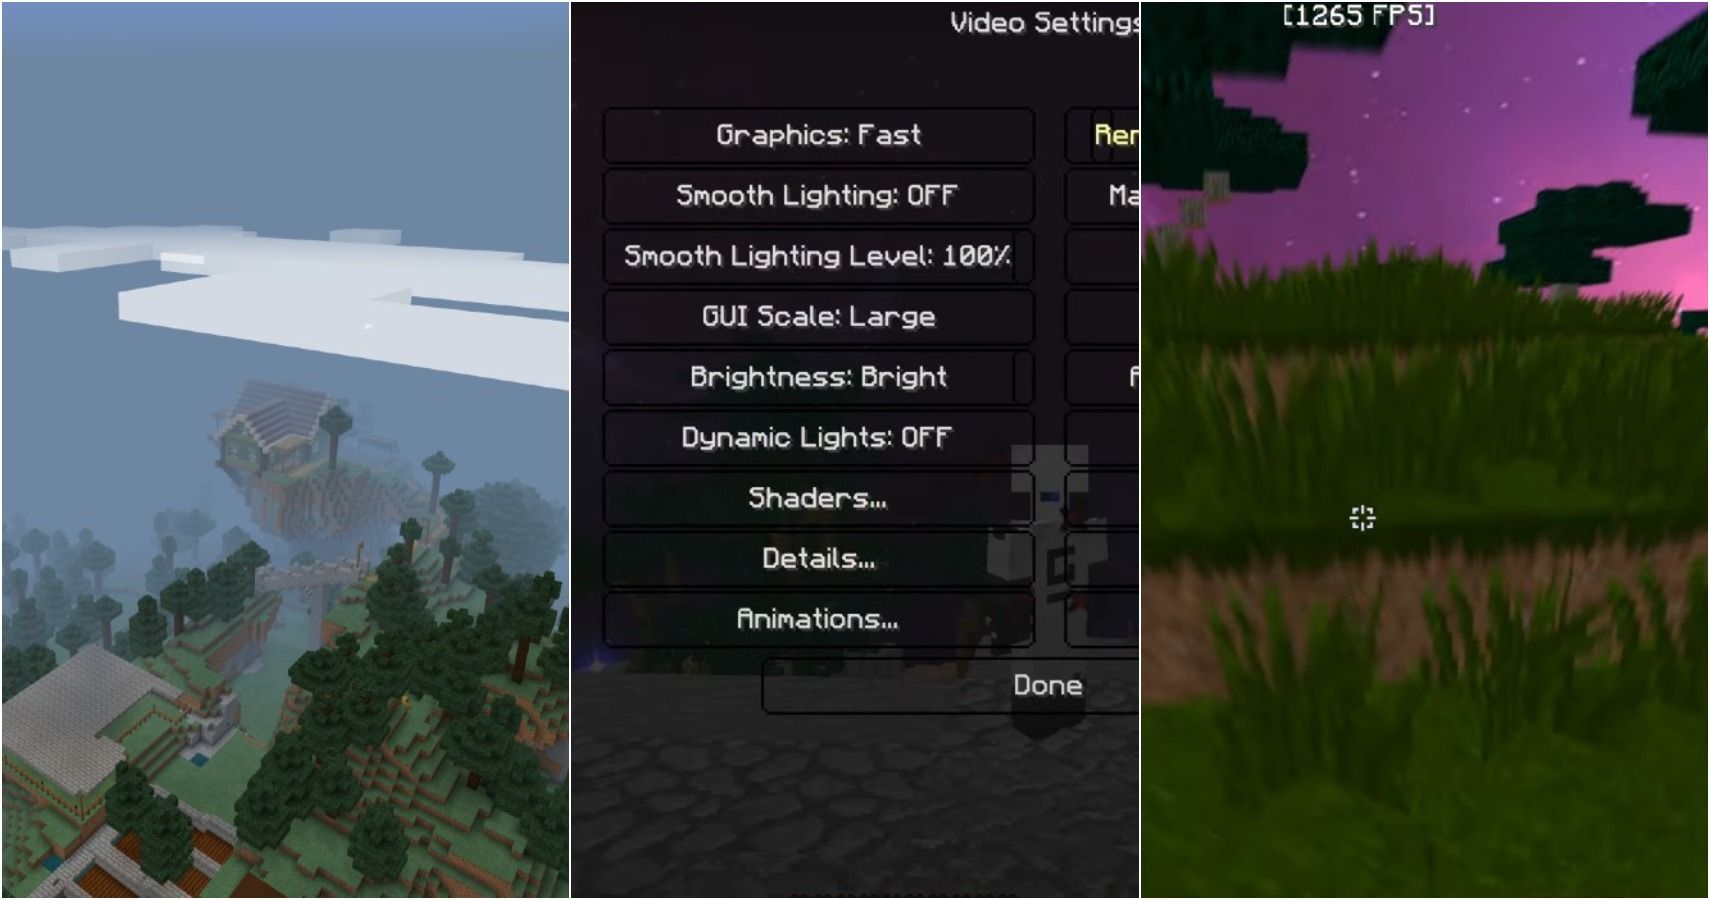 split image of cloudy overhead view in Minecraft, video settings, and twilight in grassy Minecraft field